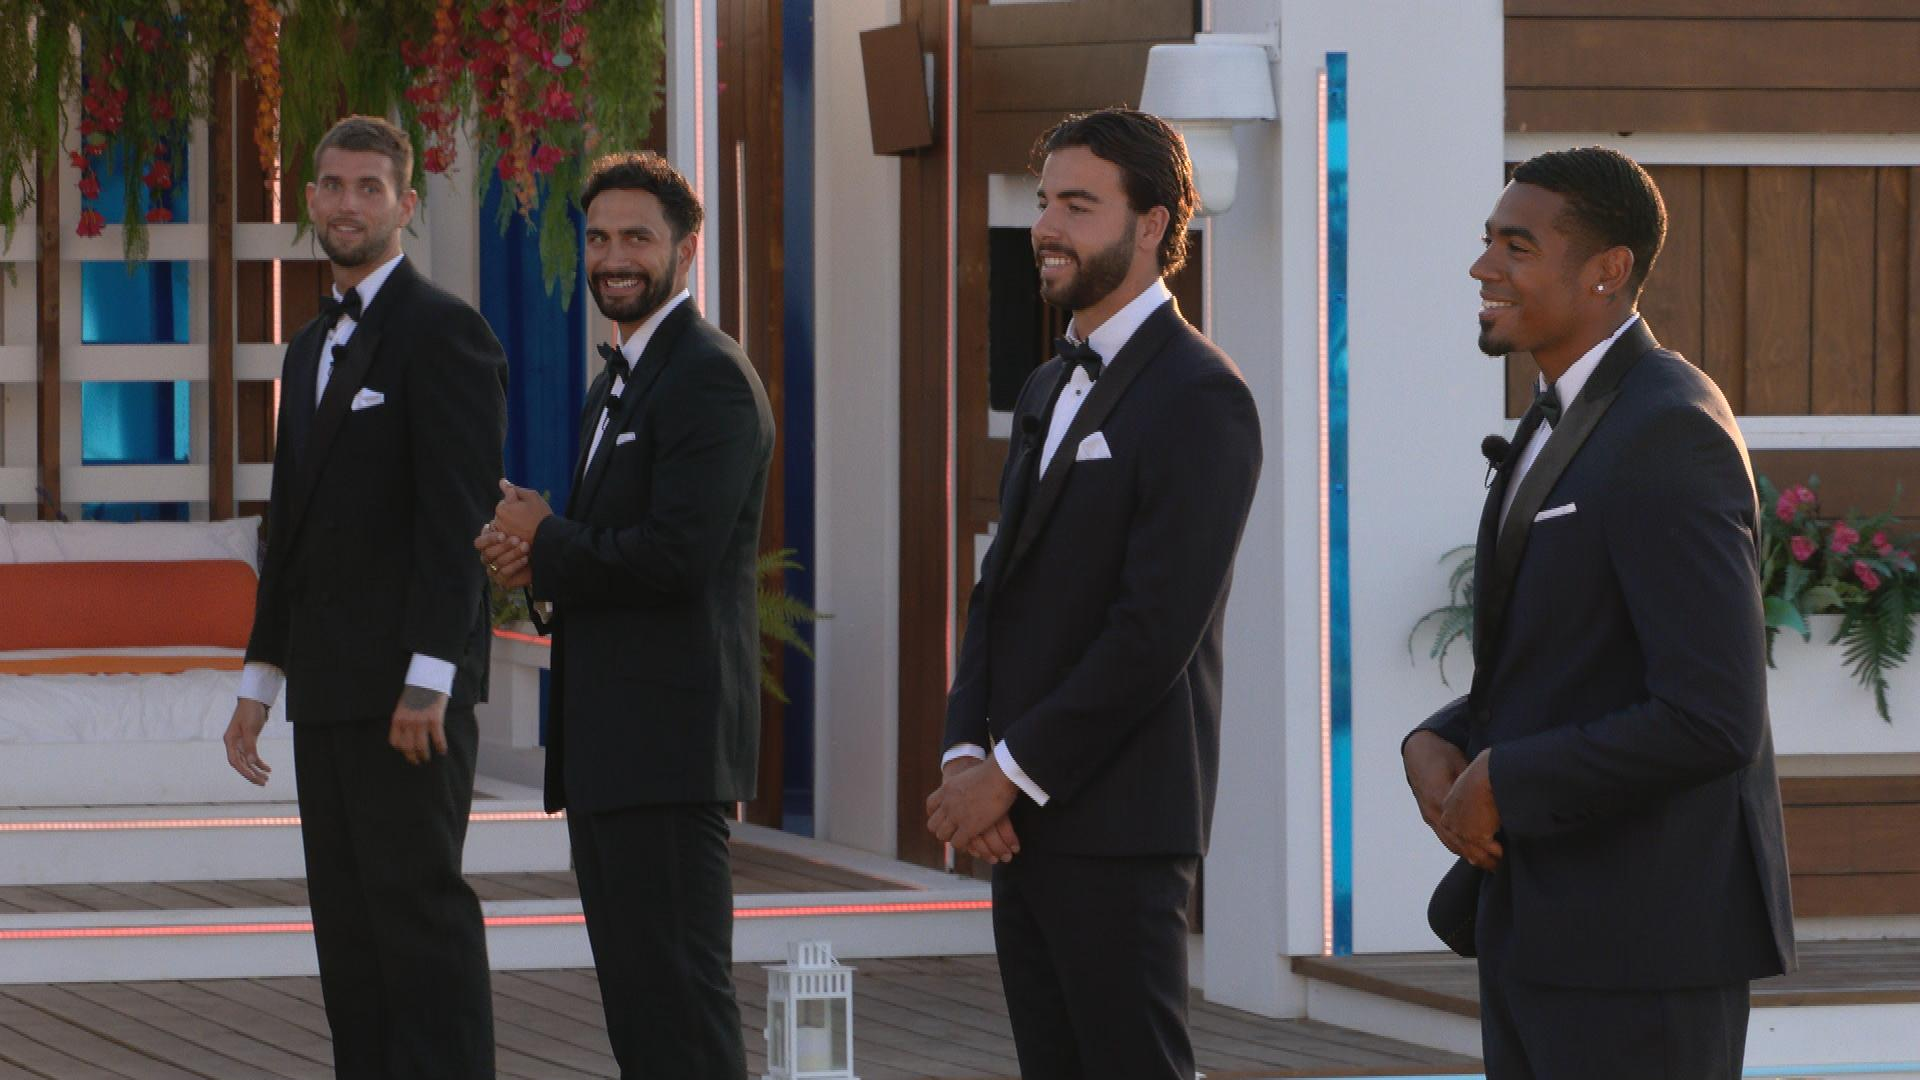 the Love Island finalist boys lined up in tuxedos